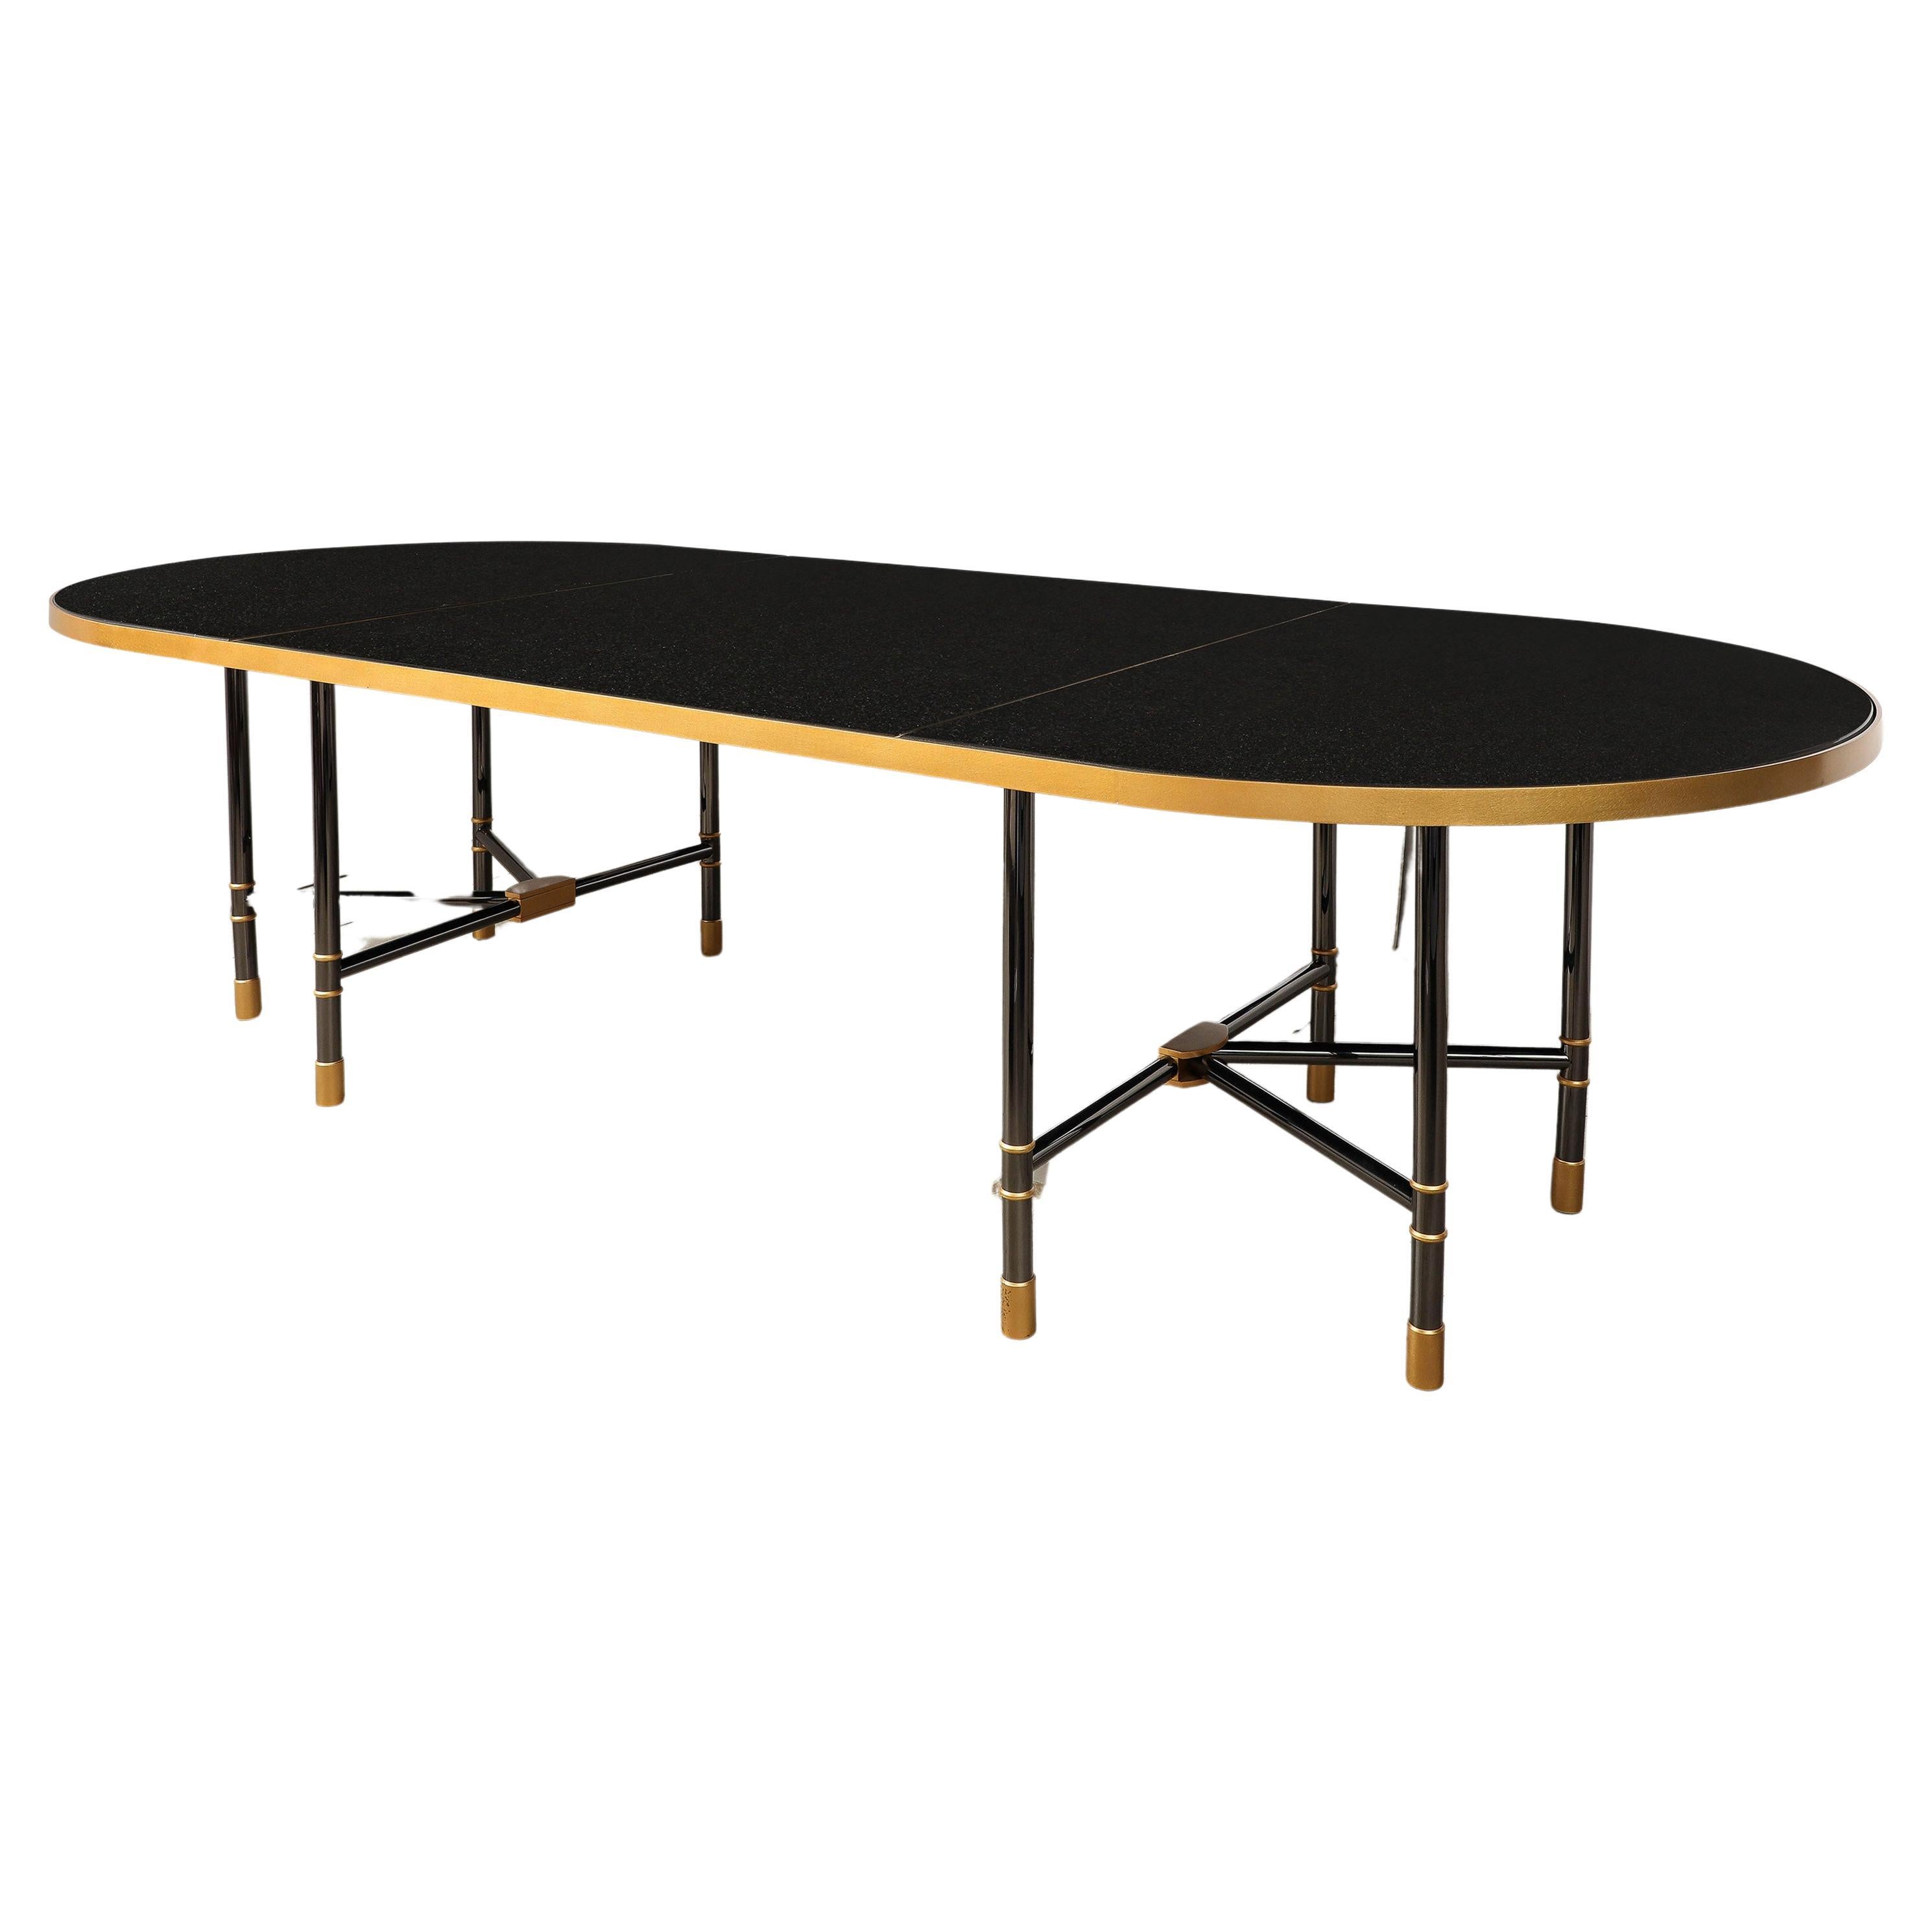 A Unique and Superb Bronze and Granite Dining Table, by Karl Springer For Sale